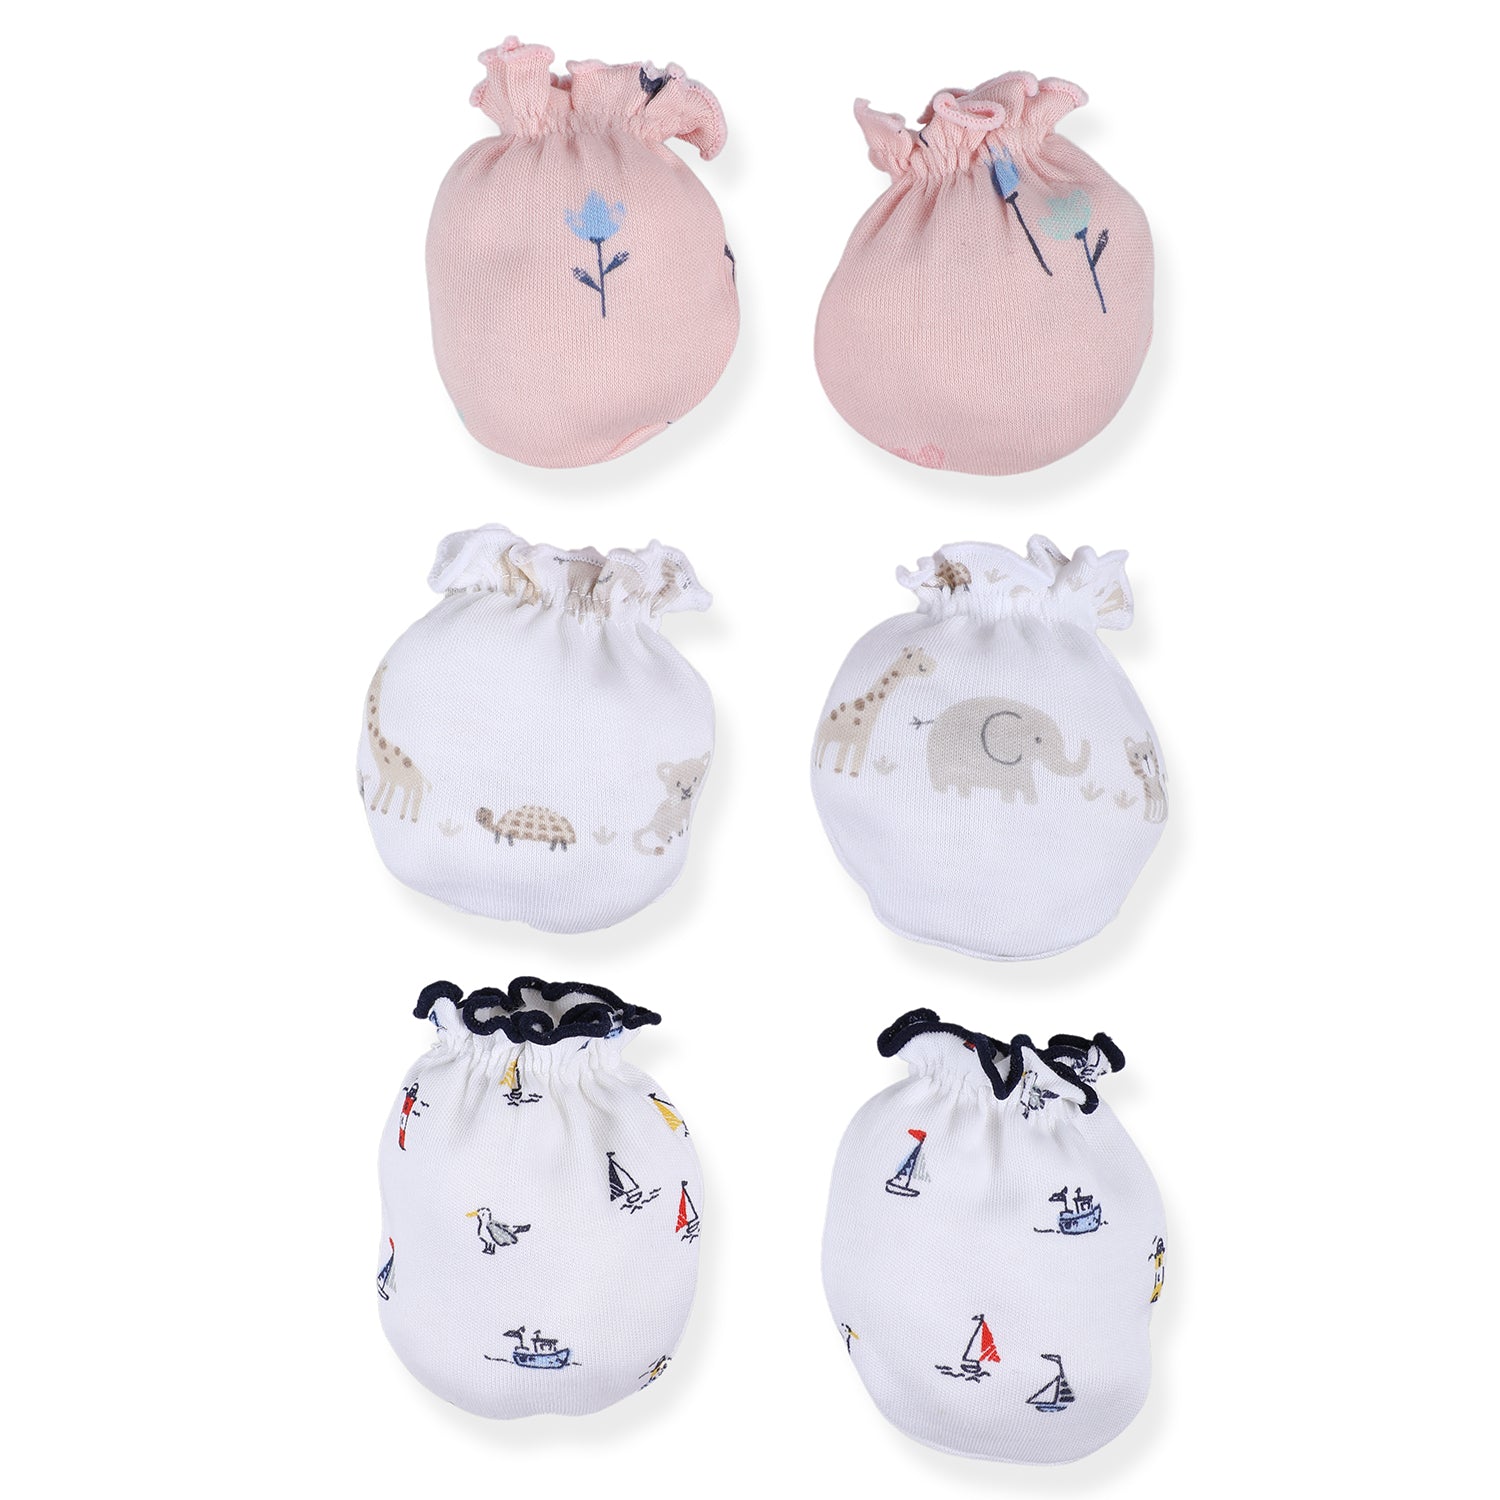 Complete Hospital Bag for Mum & Baby 19 Pcs Unisex Multicolour - Baby Moo